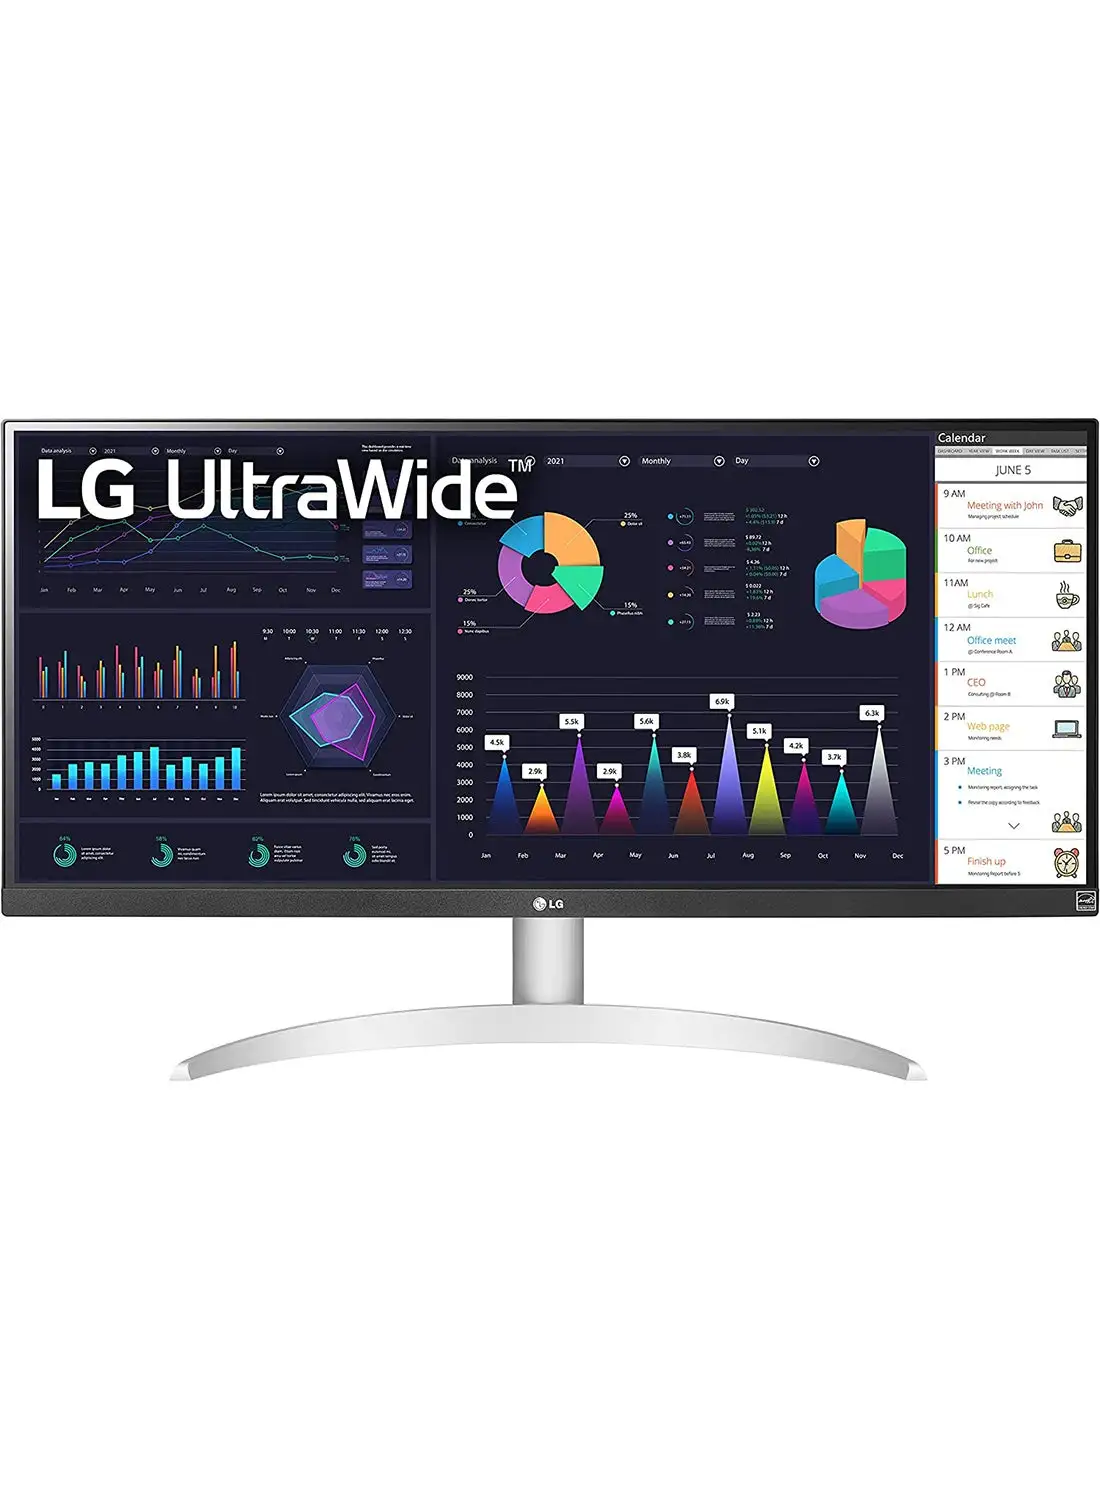 Lg 29WQ600-W 29-Inch 21:9 UltraWide Full HD (2560 x 1080) 100Hz IPS Monitor, with RGB 99% Color Gamut with HDR10, USB Type-C, AMD FreeSync, Built in Speakers, 3-Side Virtually Borderless Design Silver